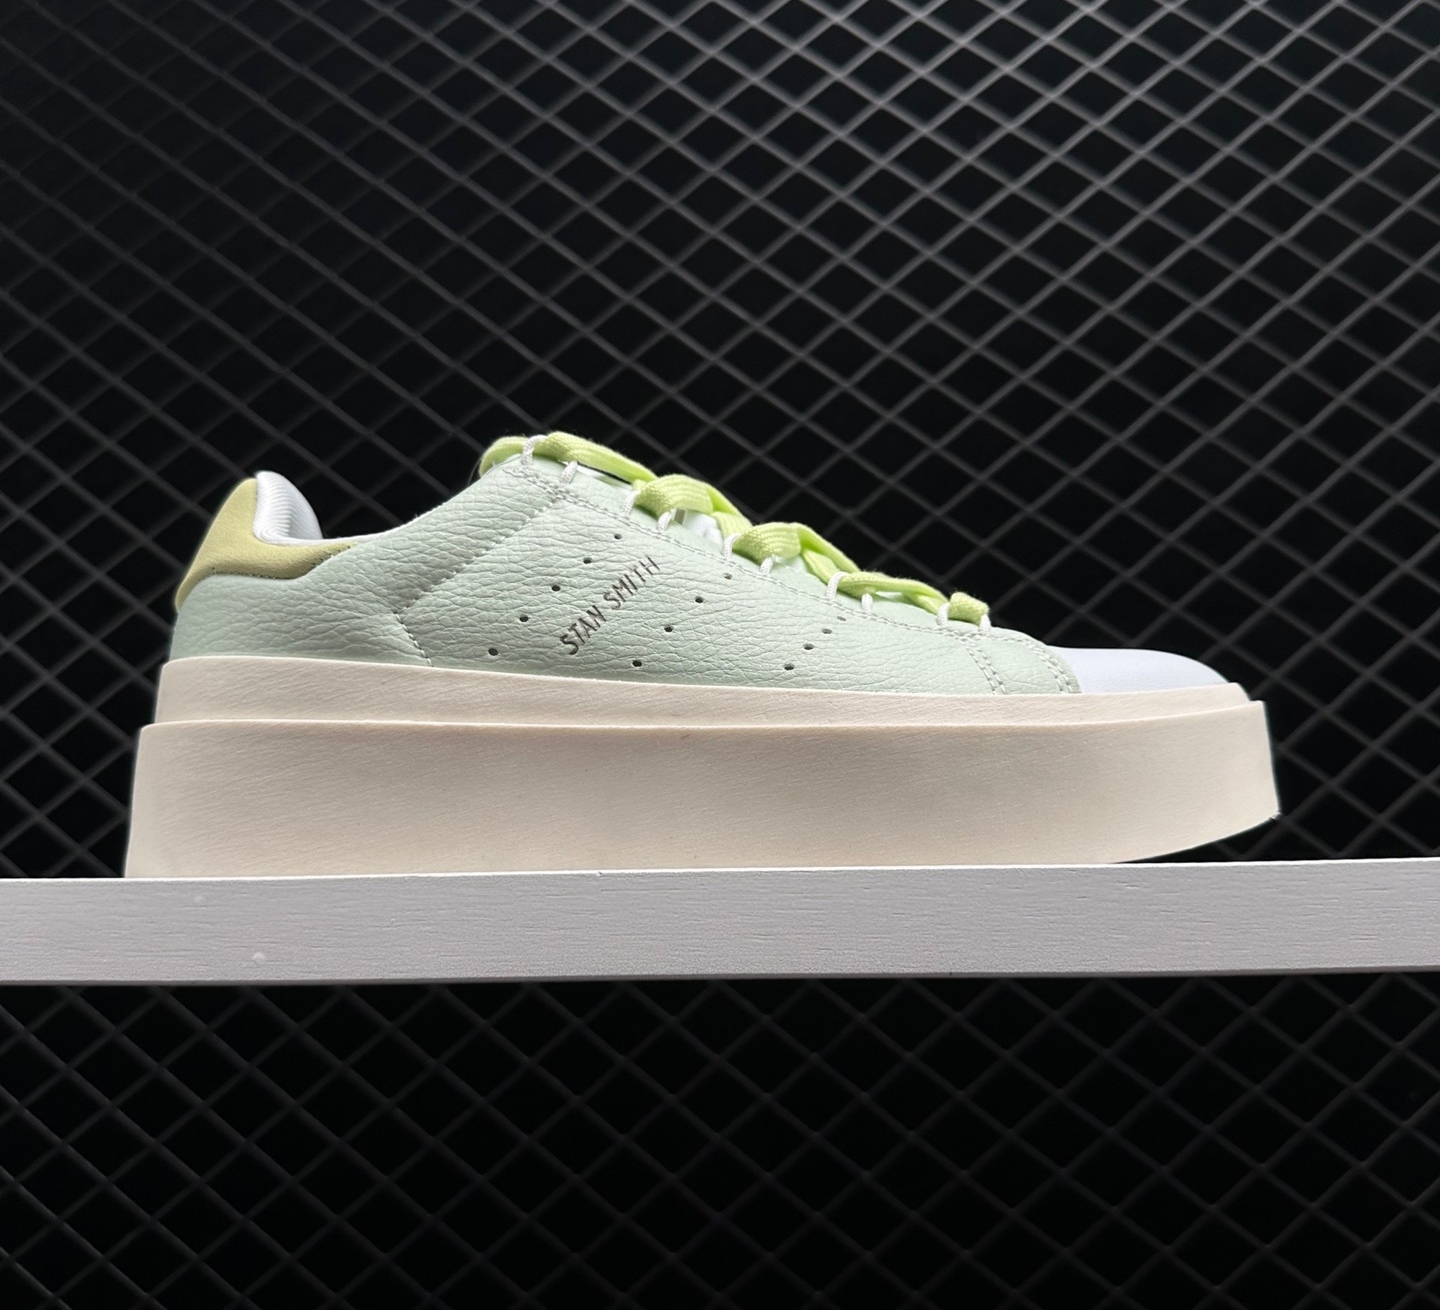 Adidas Stan Smith Bonega Linen Green Almost Lime GY9343 - Refresh your style with vibrant hues